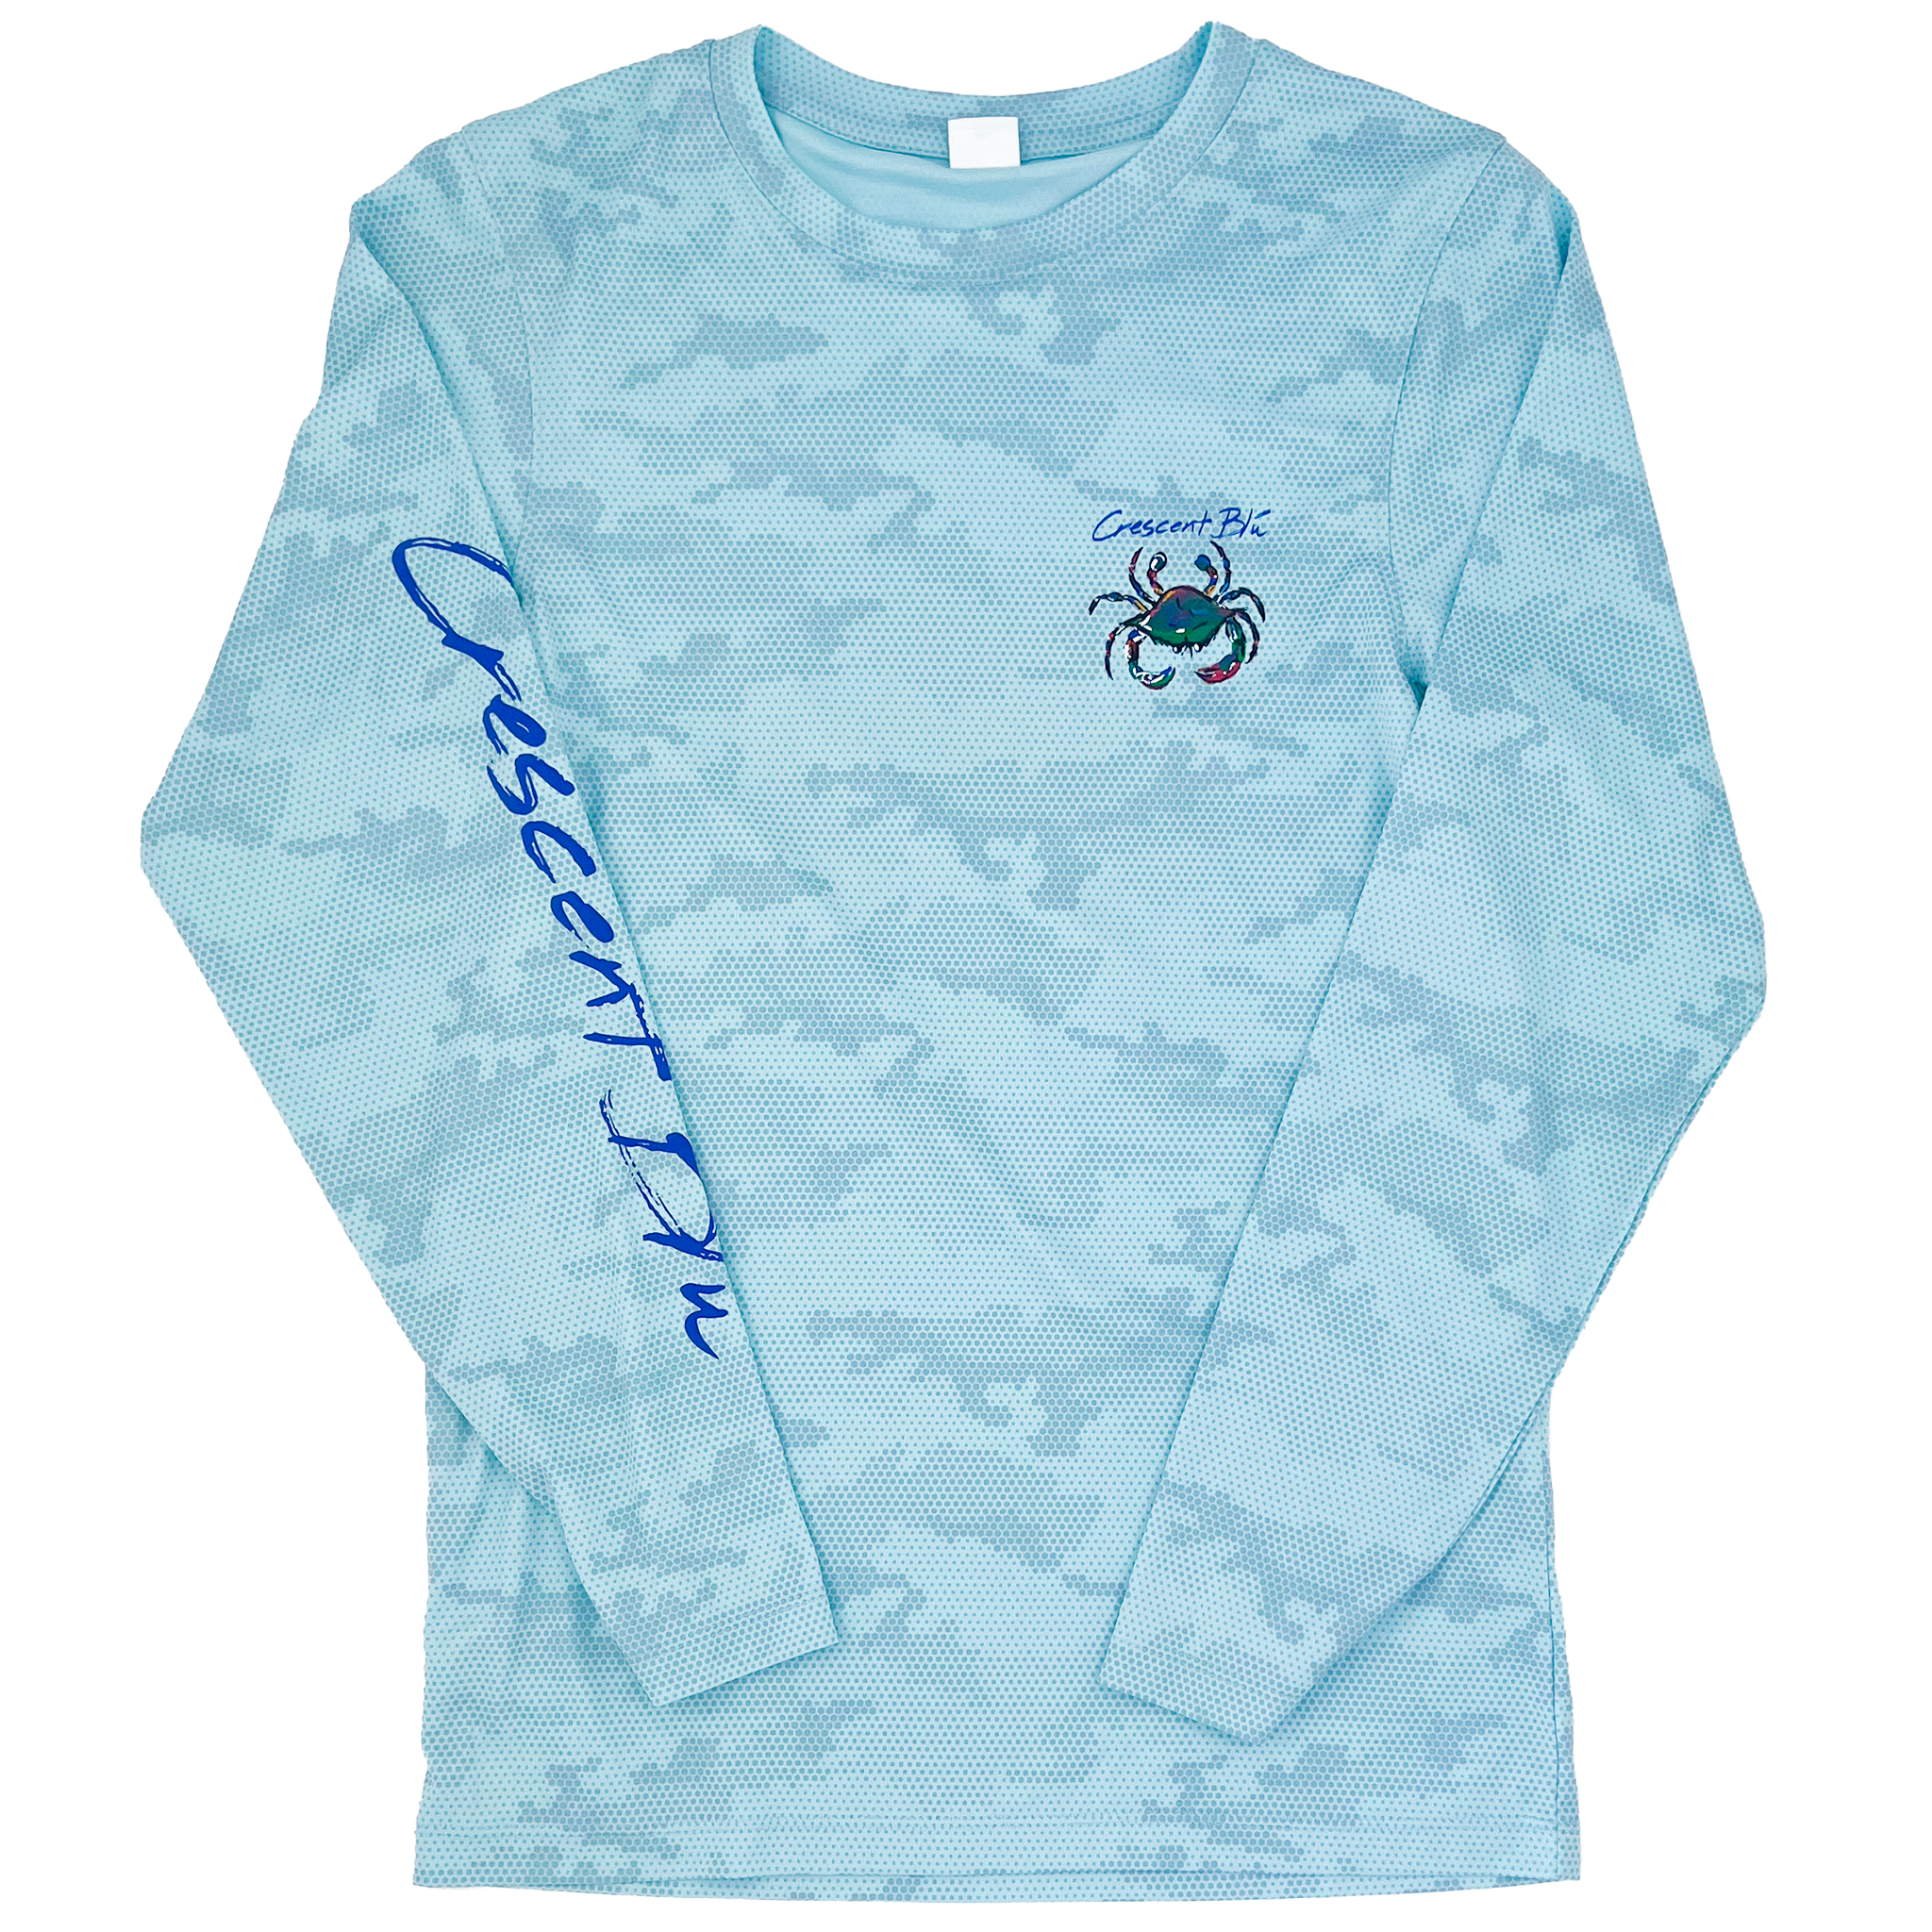 Front view of Adult Aqua Camo Performance UPF 50+ long sleeve. Crescent Blu printed on right sleeve. Left uppr chest with Crescent Blu Signature crab logo.